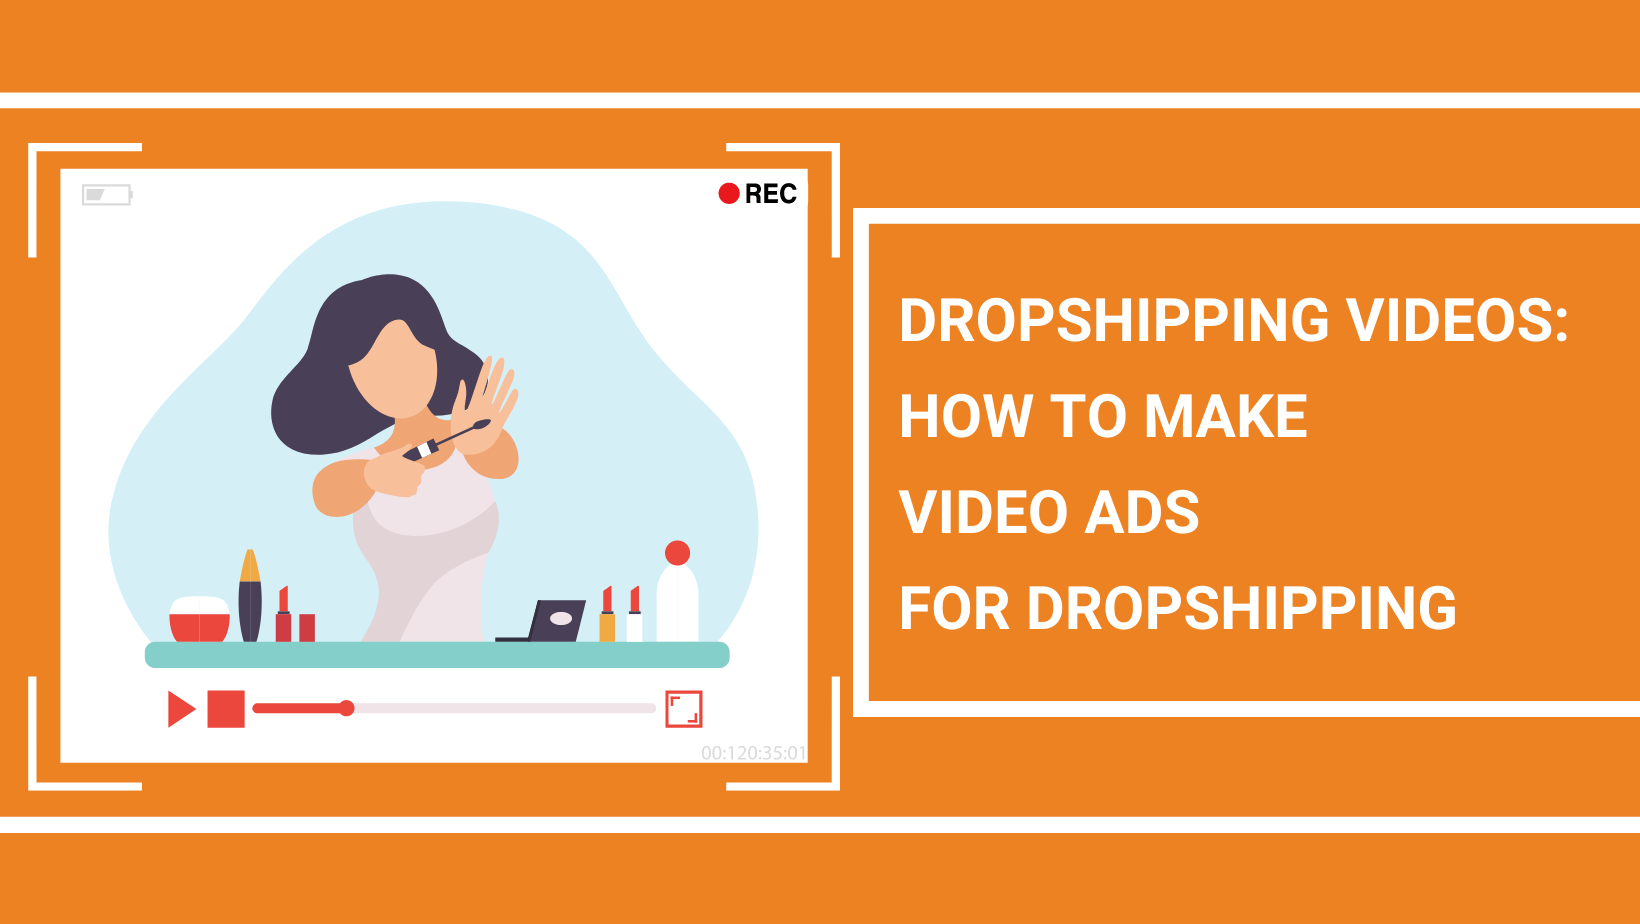 DROPSHIPPING VIDEOS HOW TO MAKE VIDEO ADS FOR DROPSHIPPING